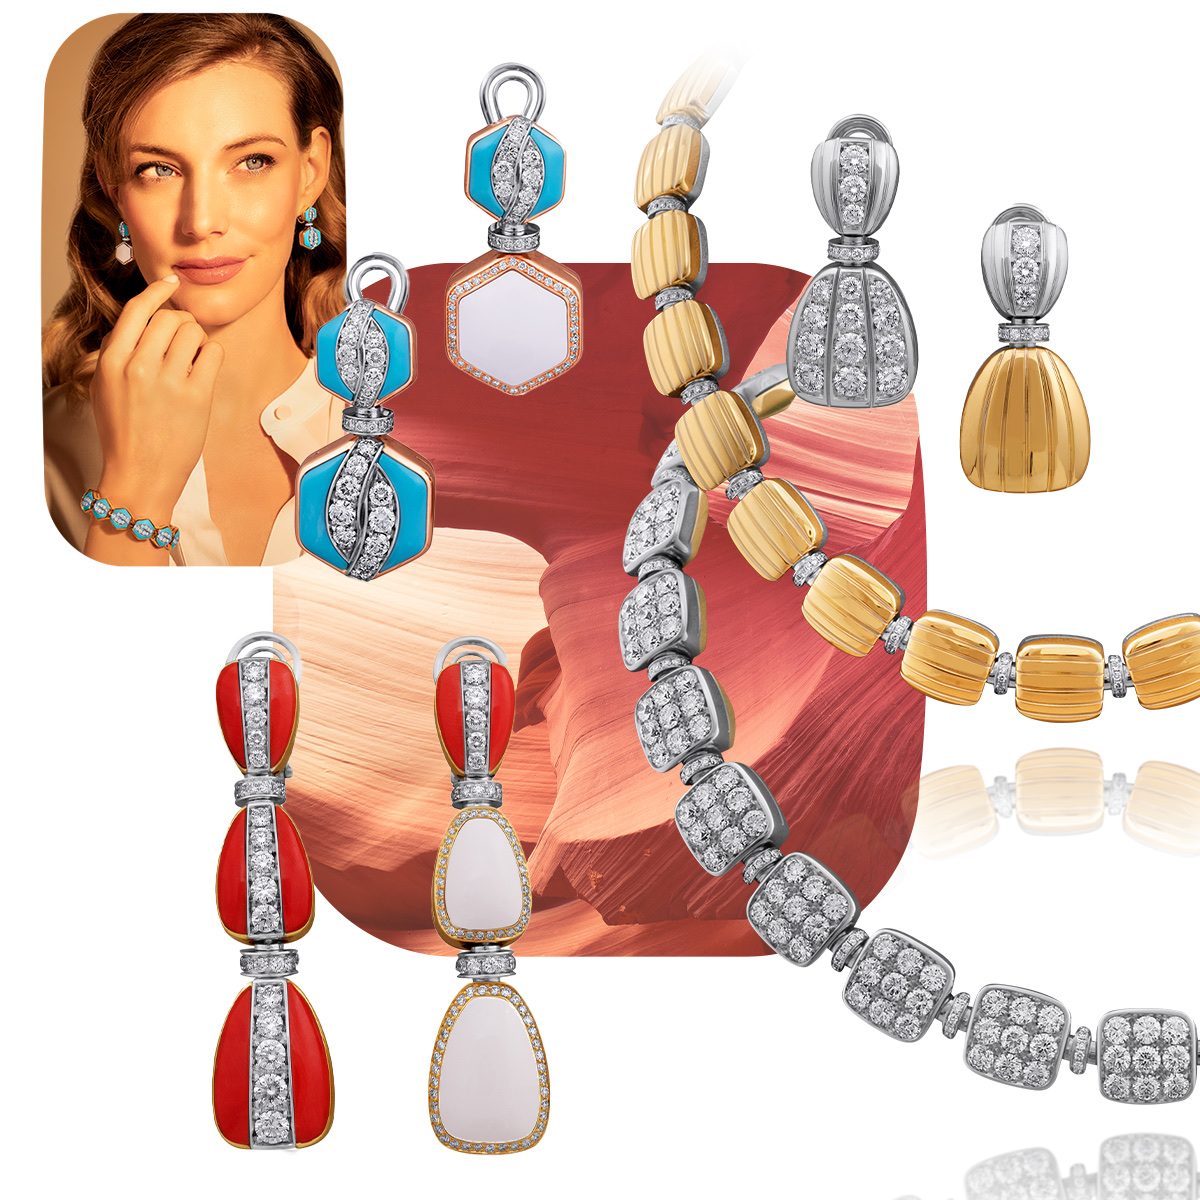 PICCHIOTTI Xpandable Reversible earrings featuring all white diamonds on one side and an all 18K gold side on the reversible drop, PICCHIOTTI Xpandable Reversible necklace featuring all 18K gold on one side and all white diamonds on the other, PICCHIOTTI Xpandable Reversible earrings featuring coral and diamonds with two drop sections that flip to white gem ceramic, model wearing PICCHIOTTI Xpandable Reversible turquoise/white gem ceramic bracelet and earrings, PICCHIOTTI Xpandable Reversible earrings featuring turquoise and diamonds and white gem ceramic on the other side of the drop